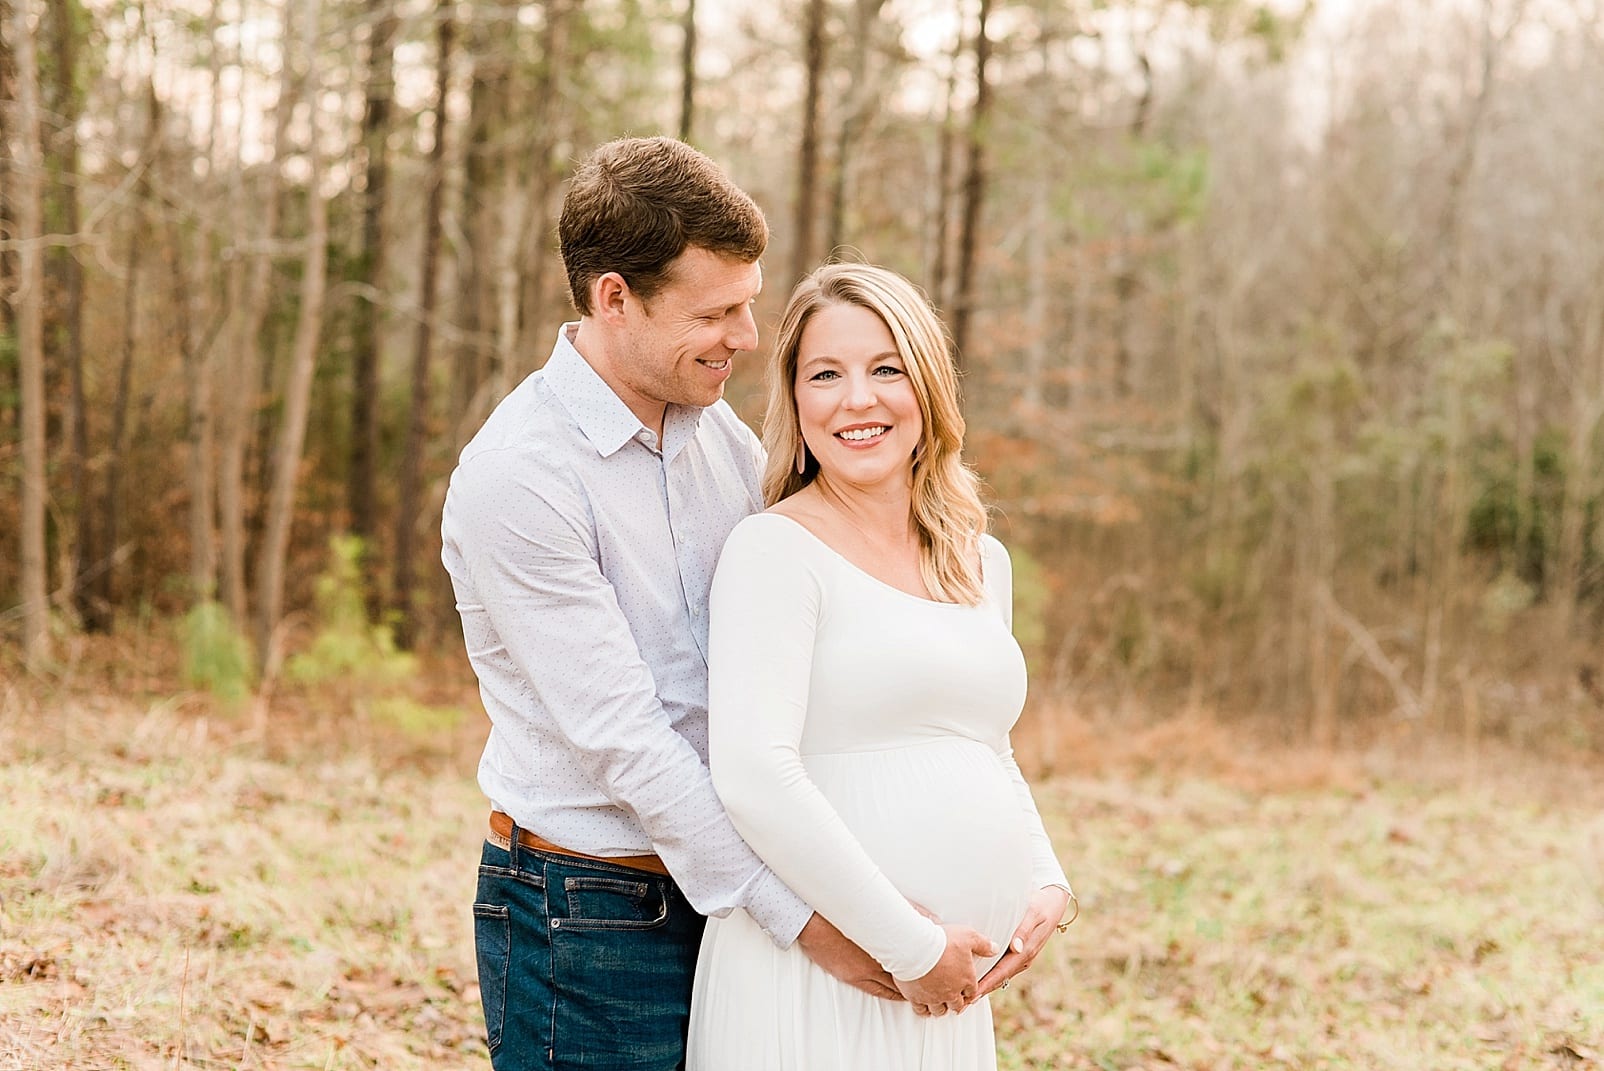 Outdoor Raleigh mini session with the wife leaning against the husband while he looks down at the belly photo